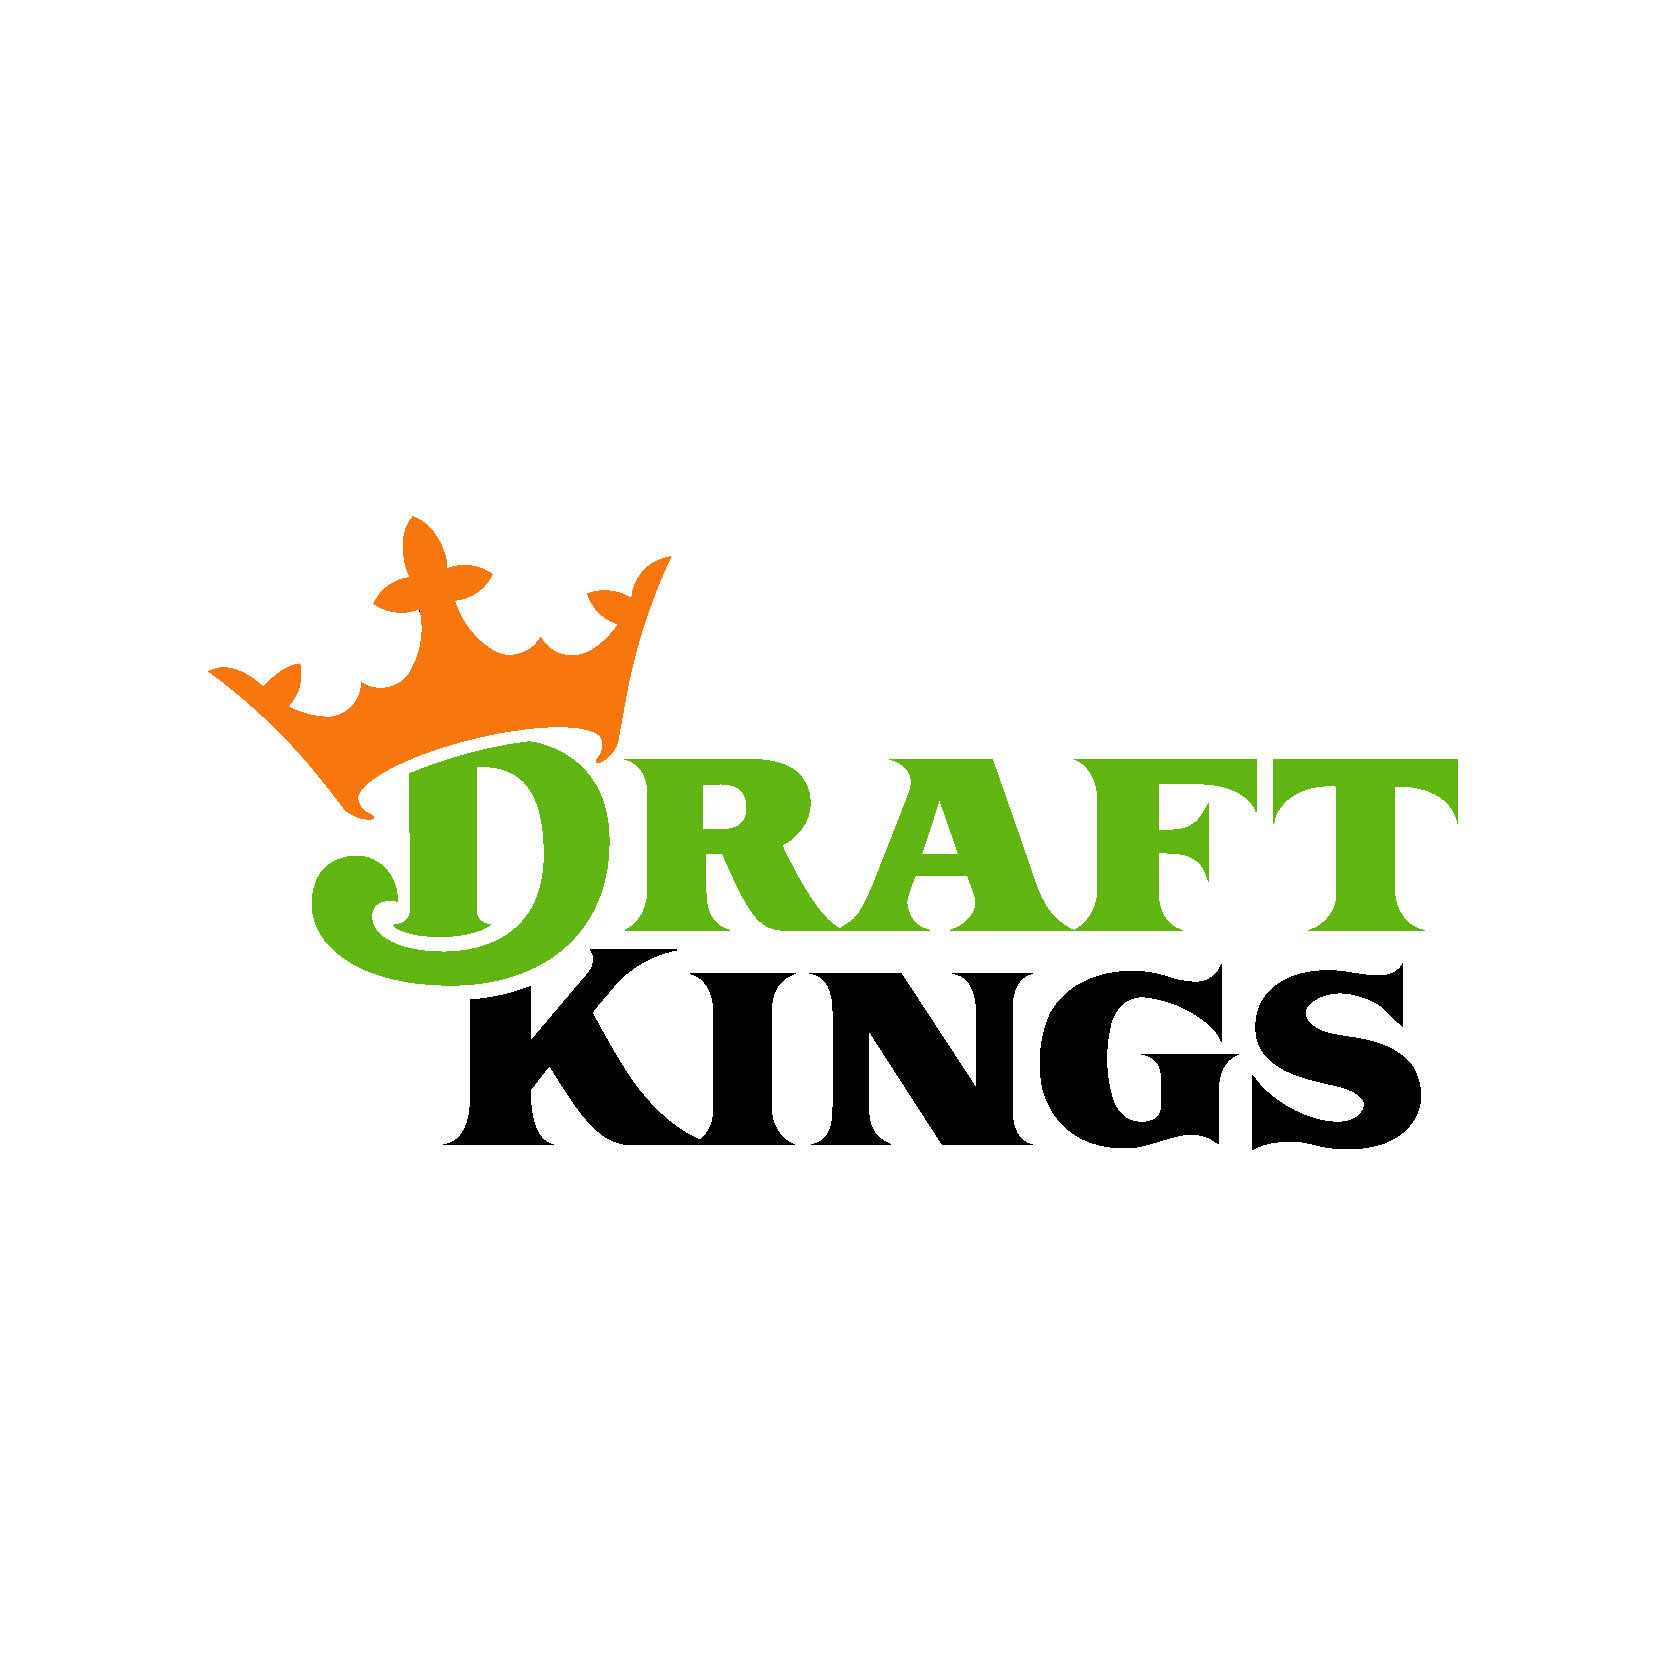 DraftKings shares